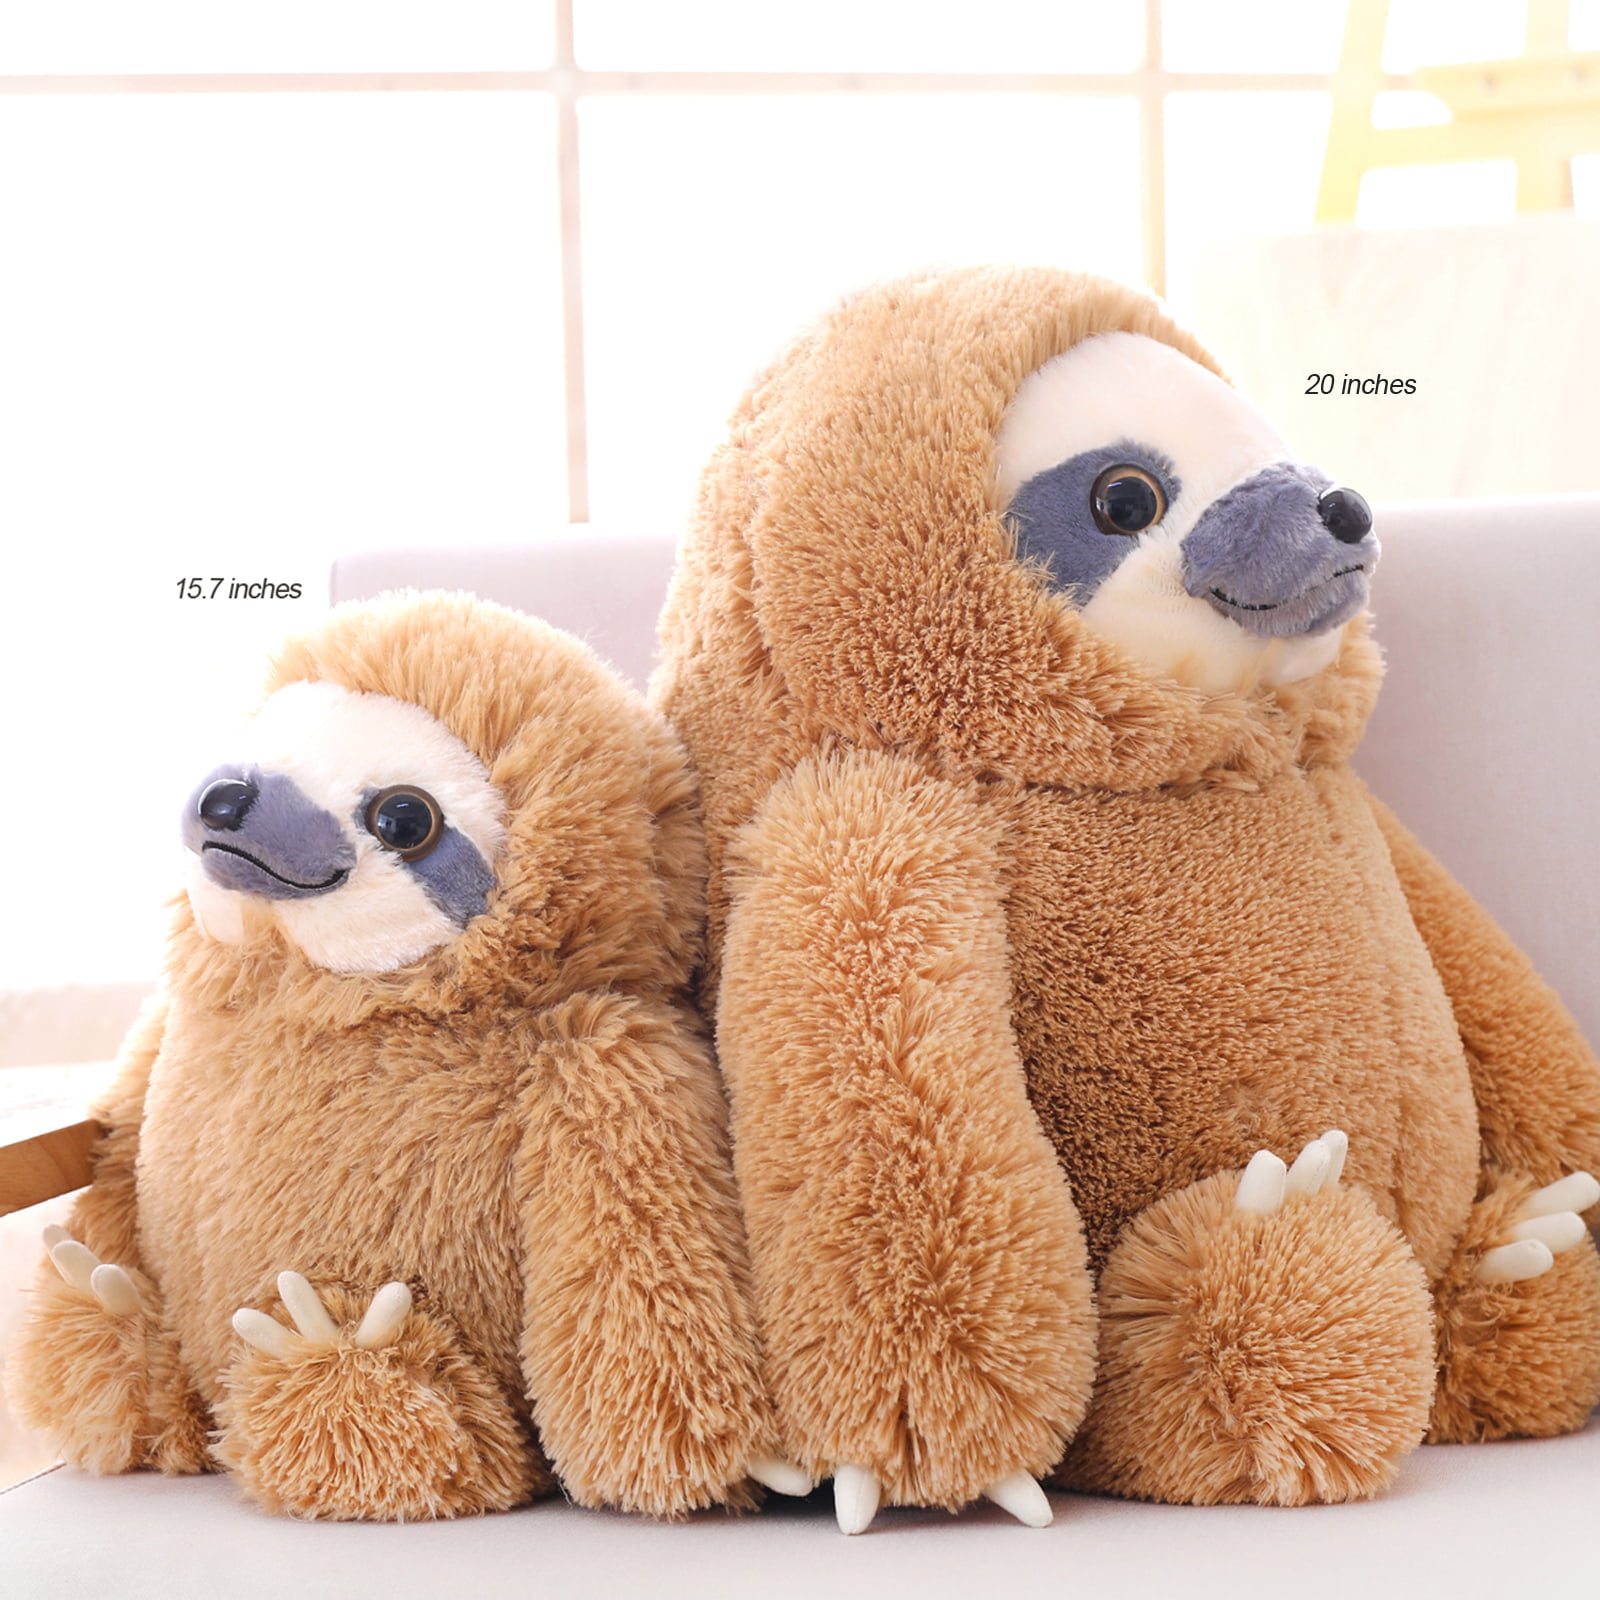 Winsterch Giant Sloth Stuffed Animal Toy Kids Plush Sloth 27.5 inches White 